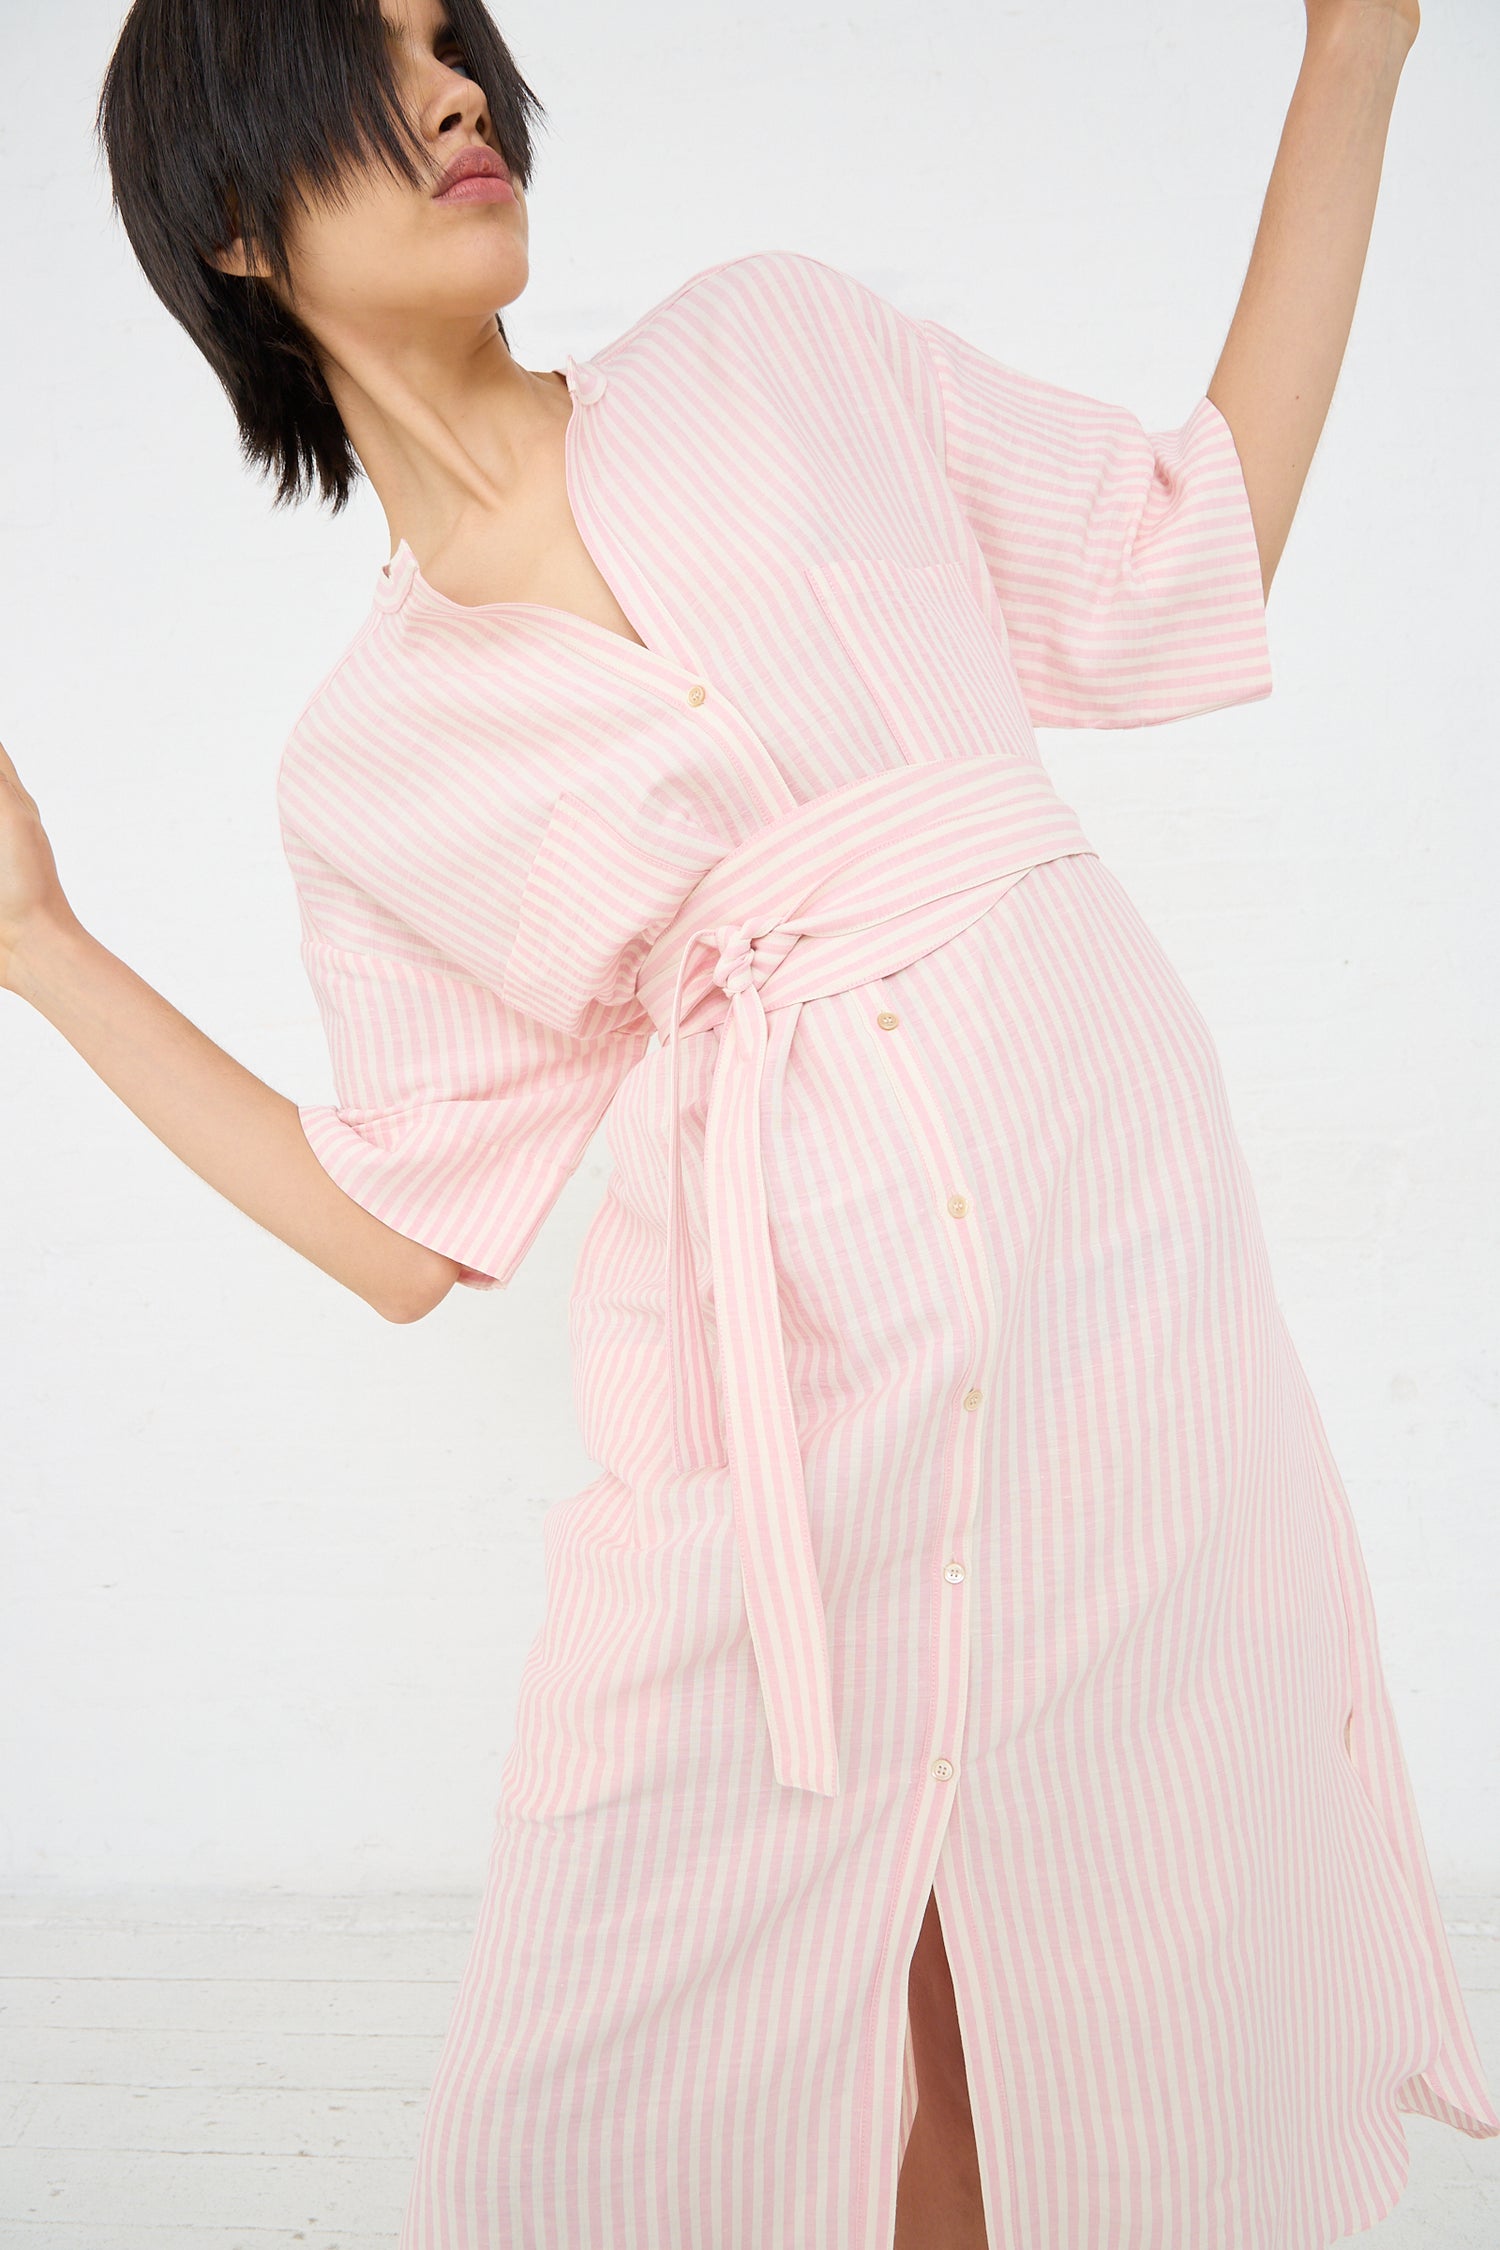 Woman posing in a Linen Stripe Kalloni Dress in Pink by Caron Callahan, an oversized shirt dress with a striped pink and white linen blend fabric and a knotted waist detail.